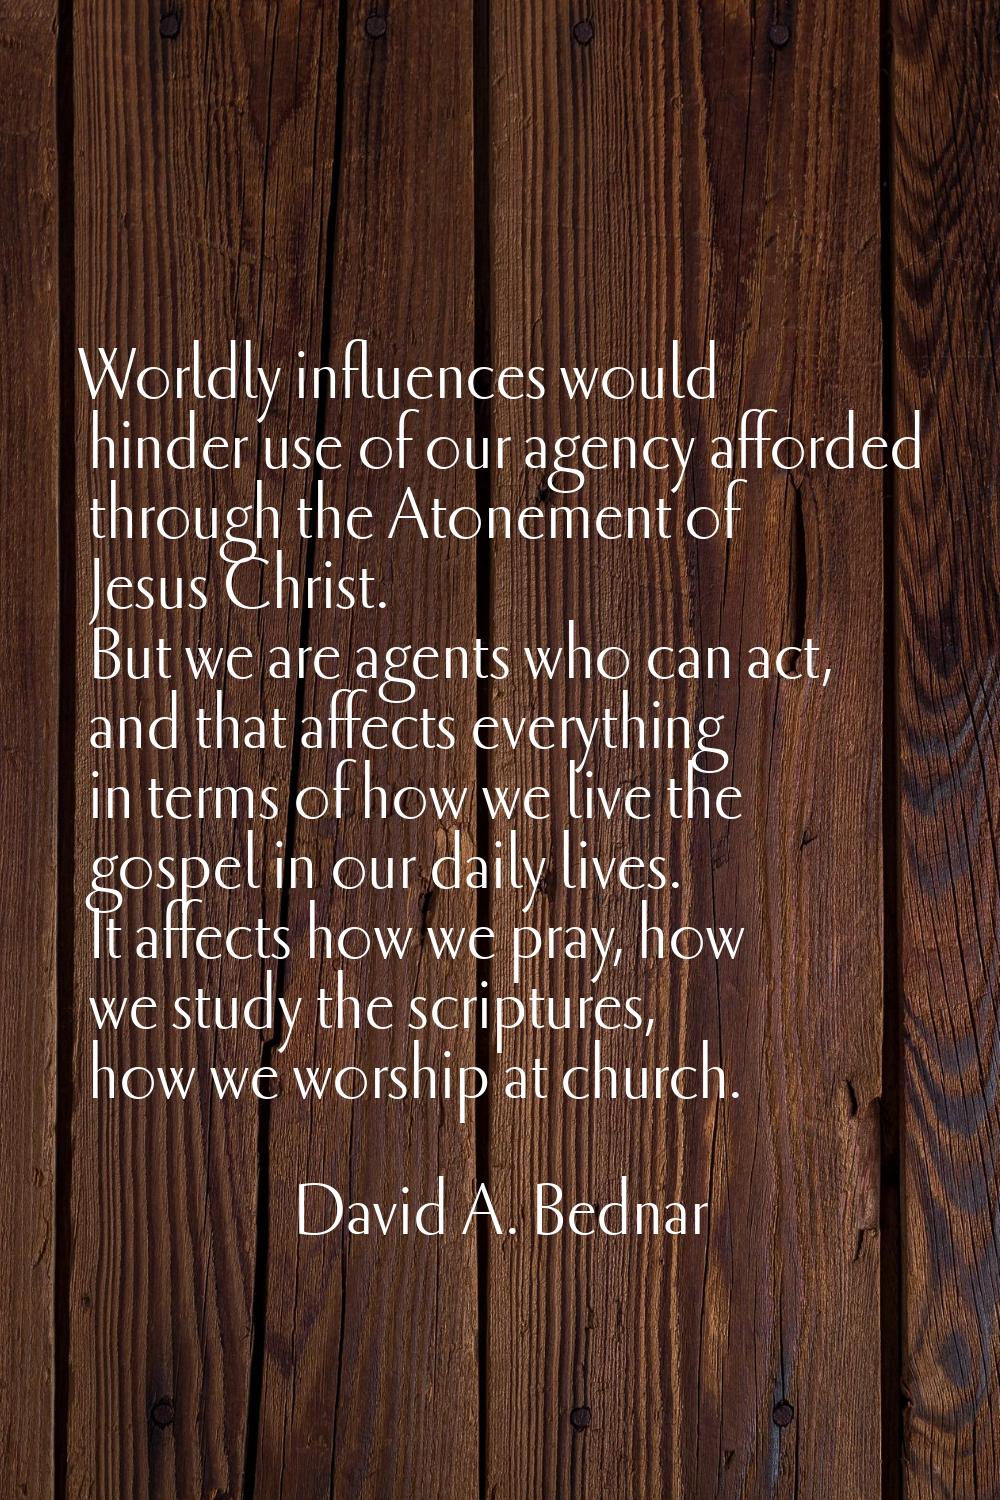 Worldly influences would hinder use of our agency afforded through the Atonement of Jesus Christ. B